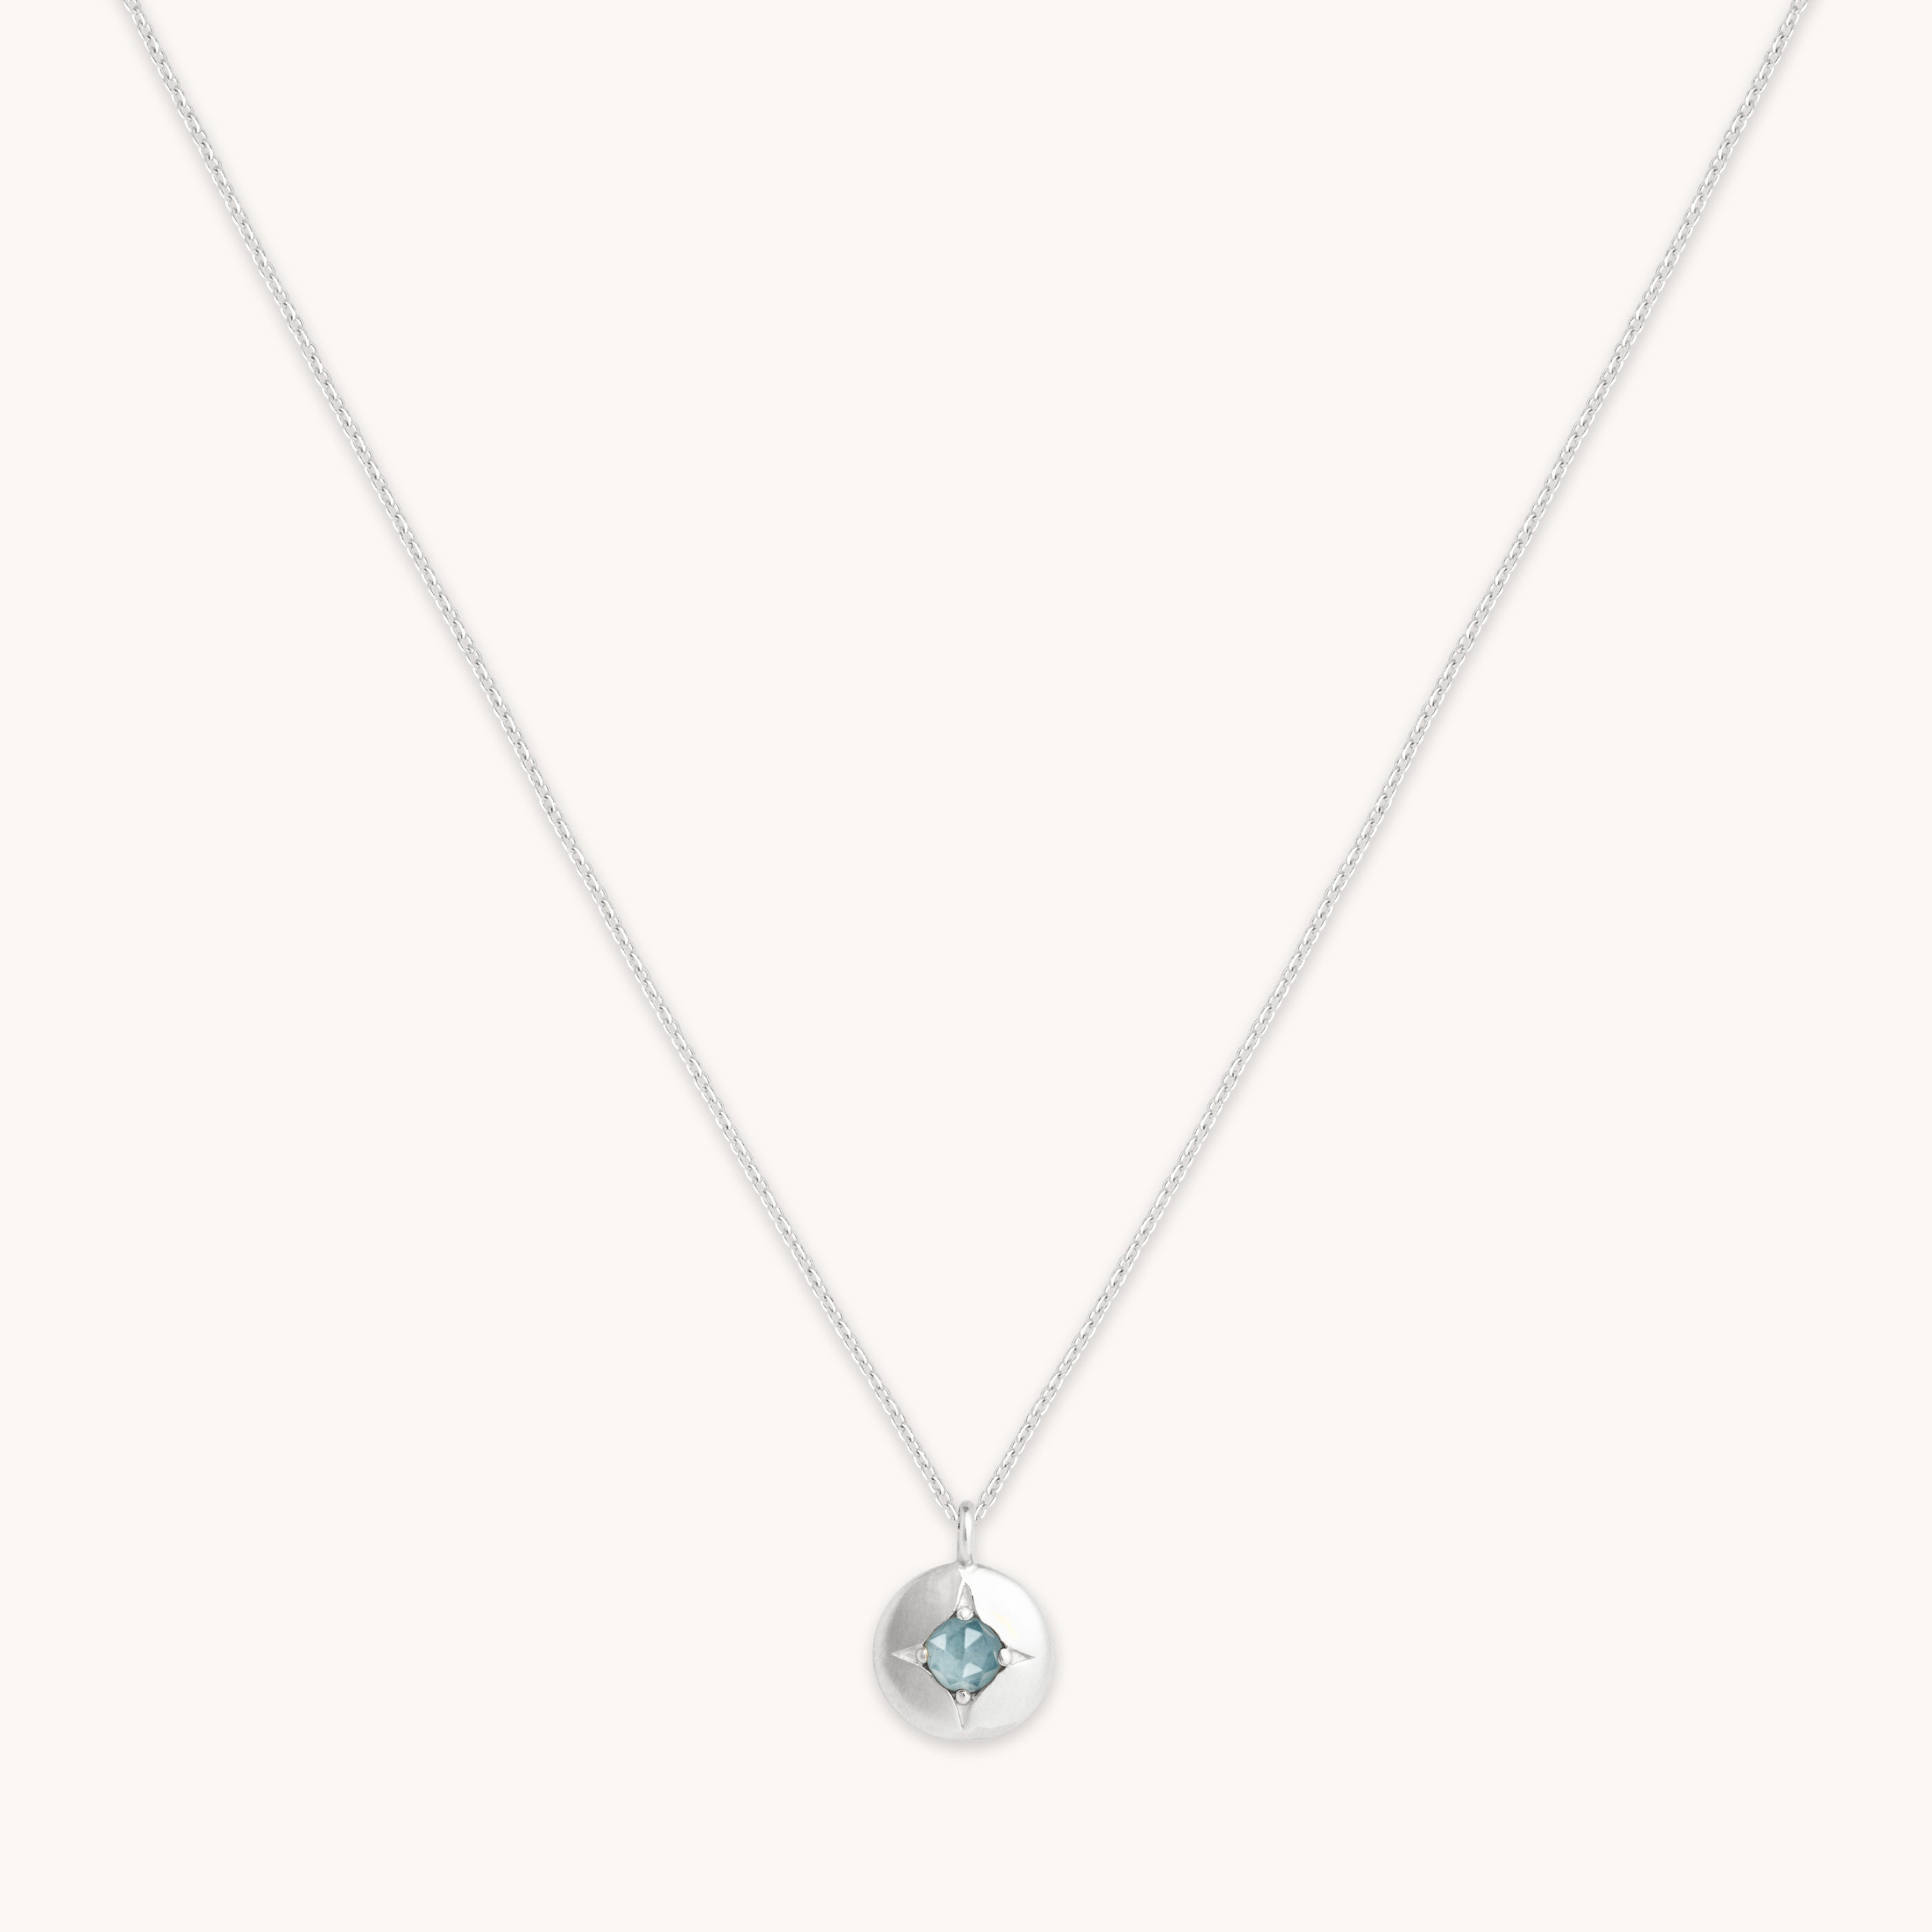 March Aquamarine Birthstone Necklace in Solid White Gold